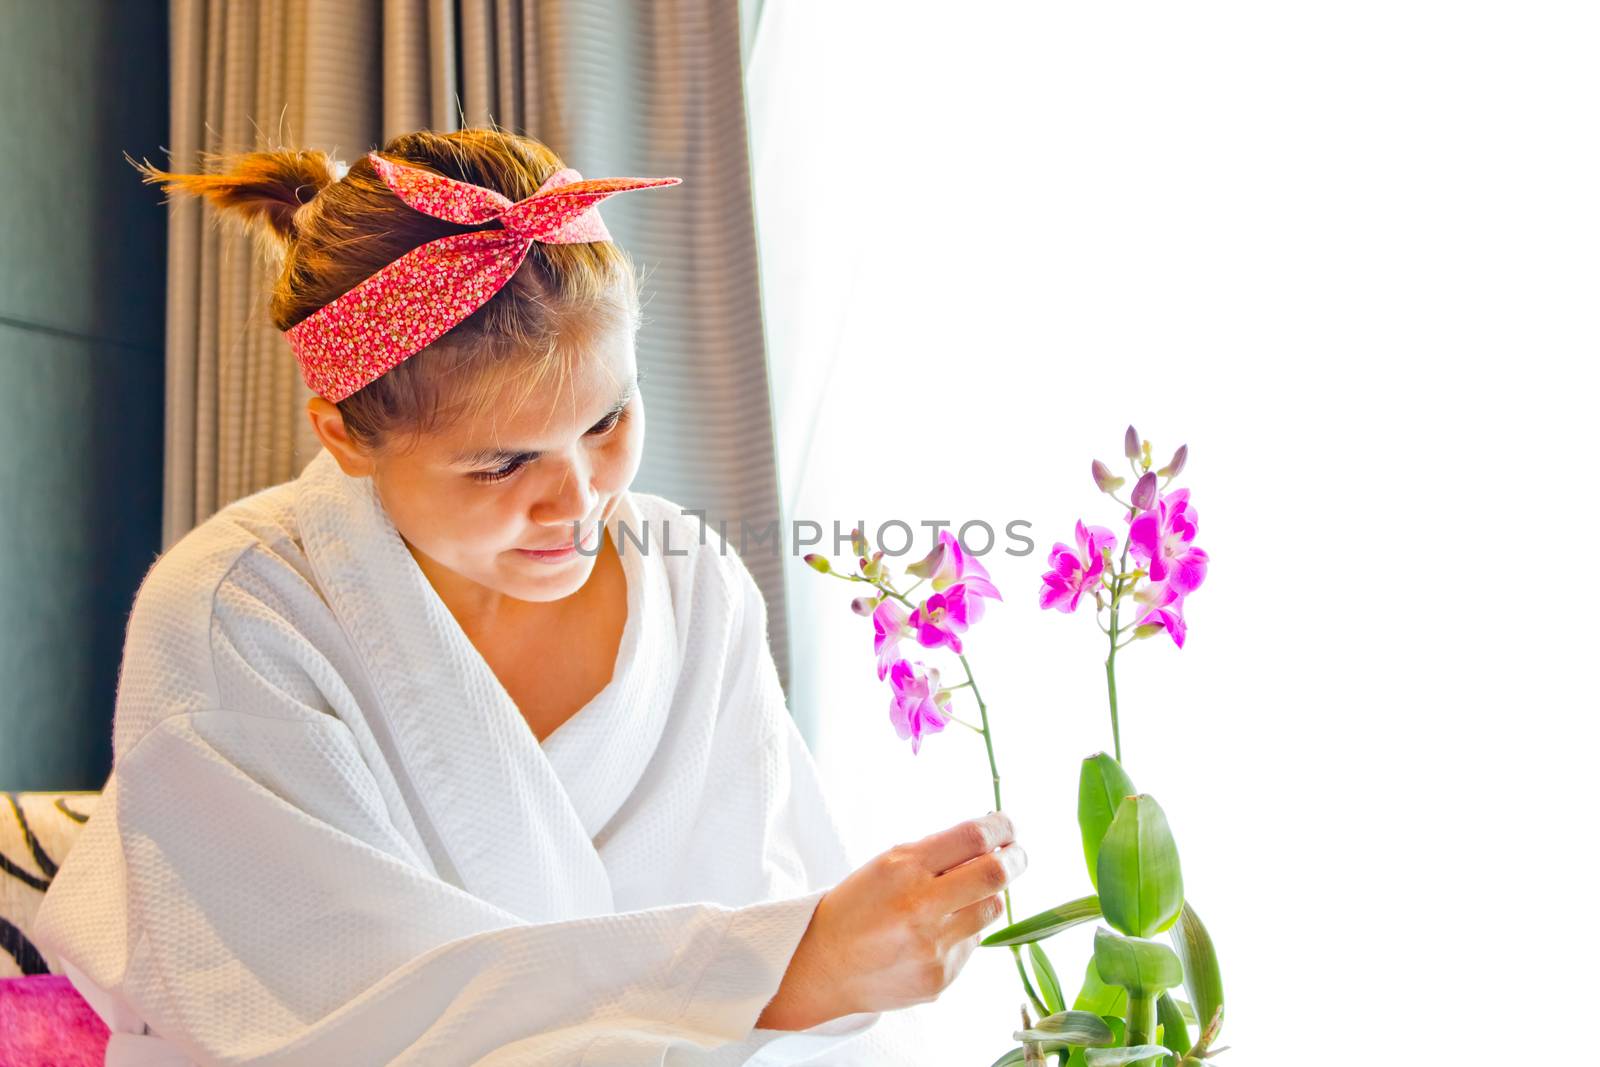 Lady wearing nightgown and flower arrangement in the morning